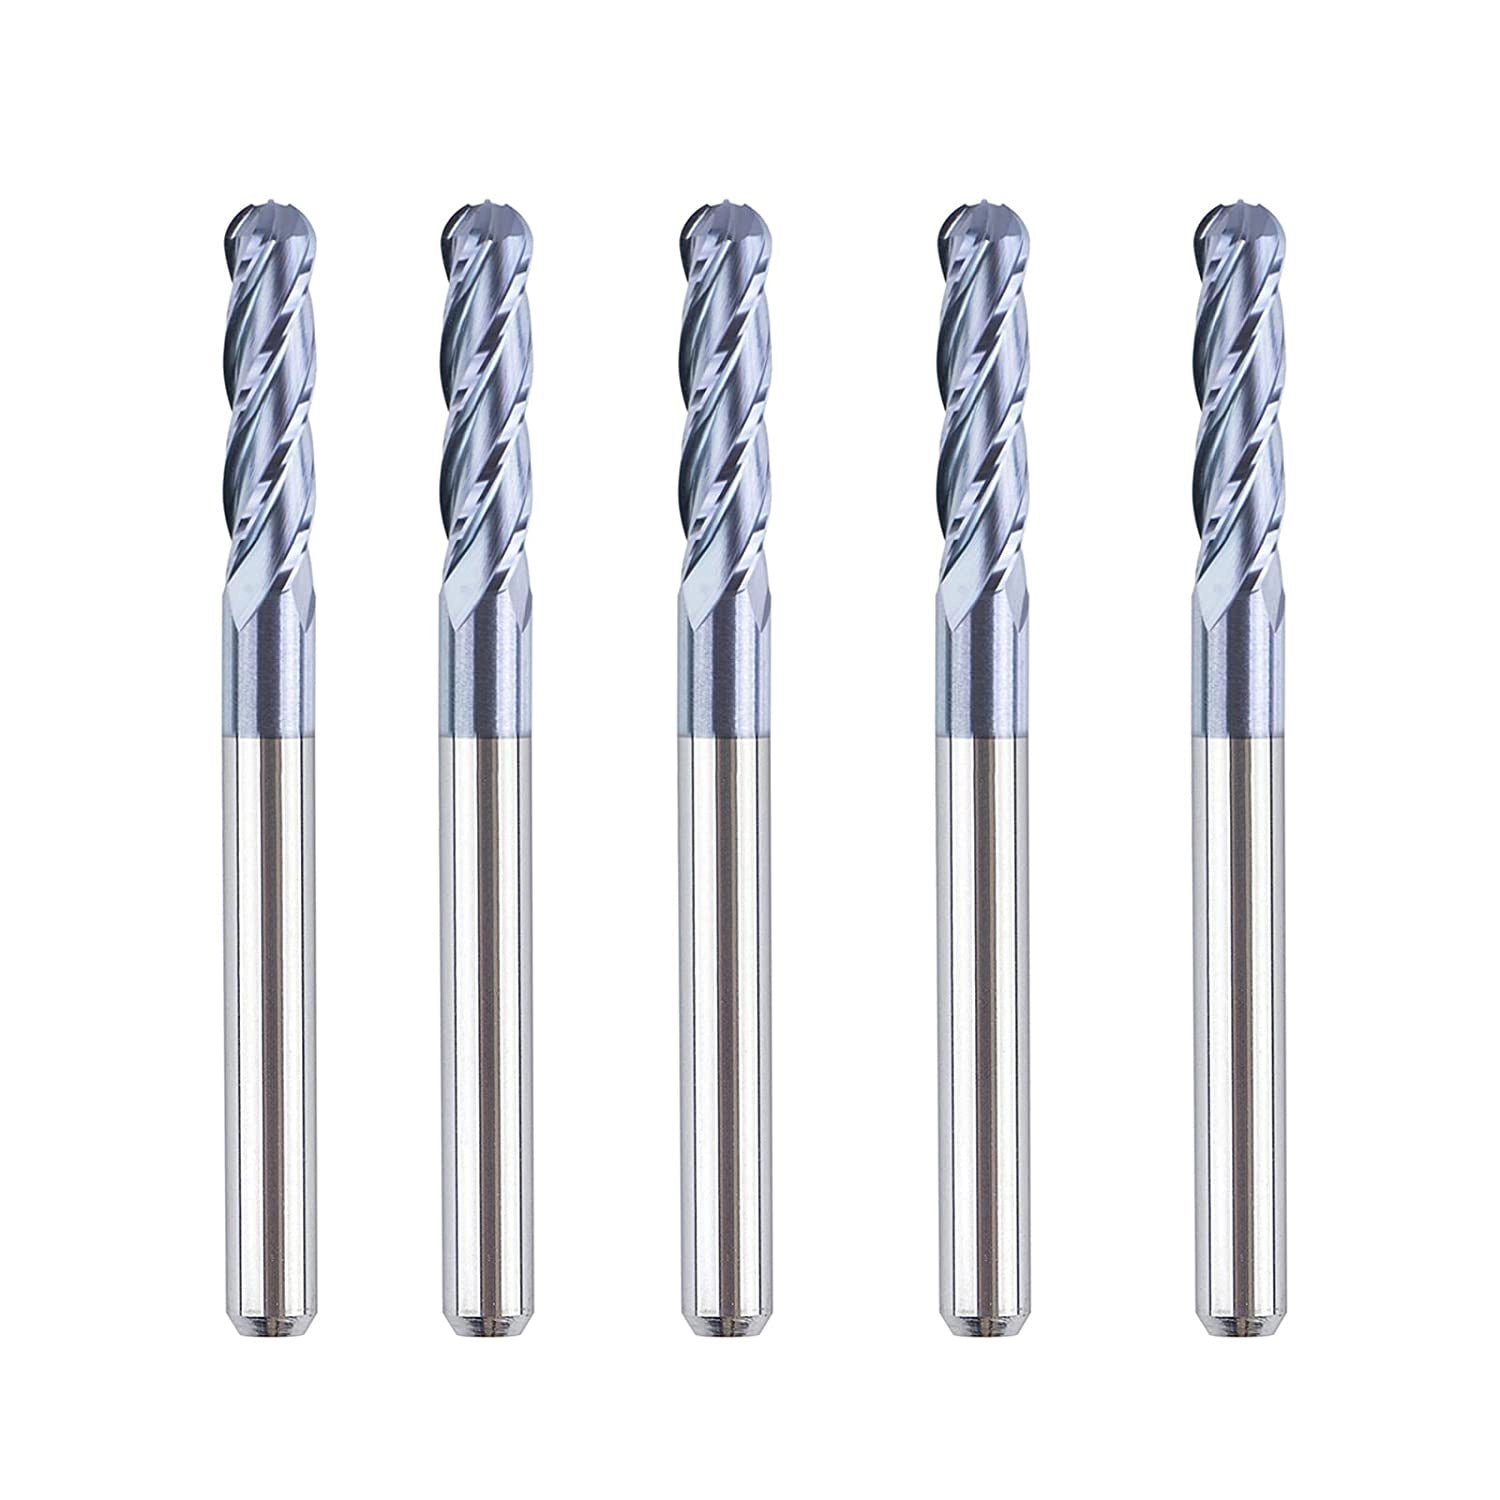 SpeTool CNC TiAlN Coated 4-Flute 1-8 Dia Ball Nose Up Cut End Mill